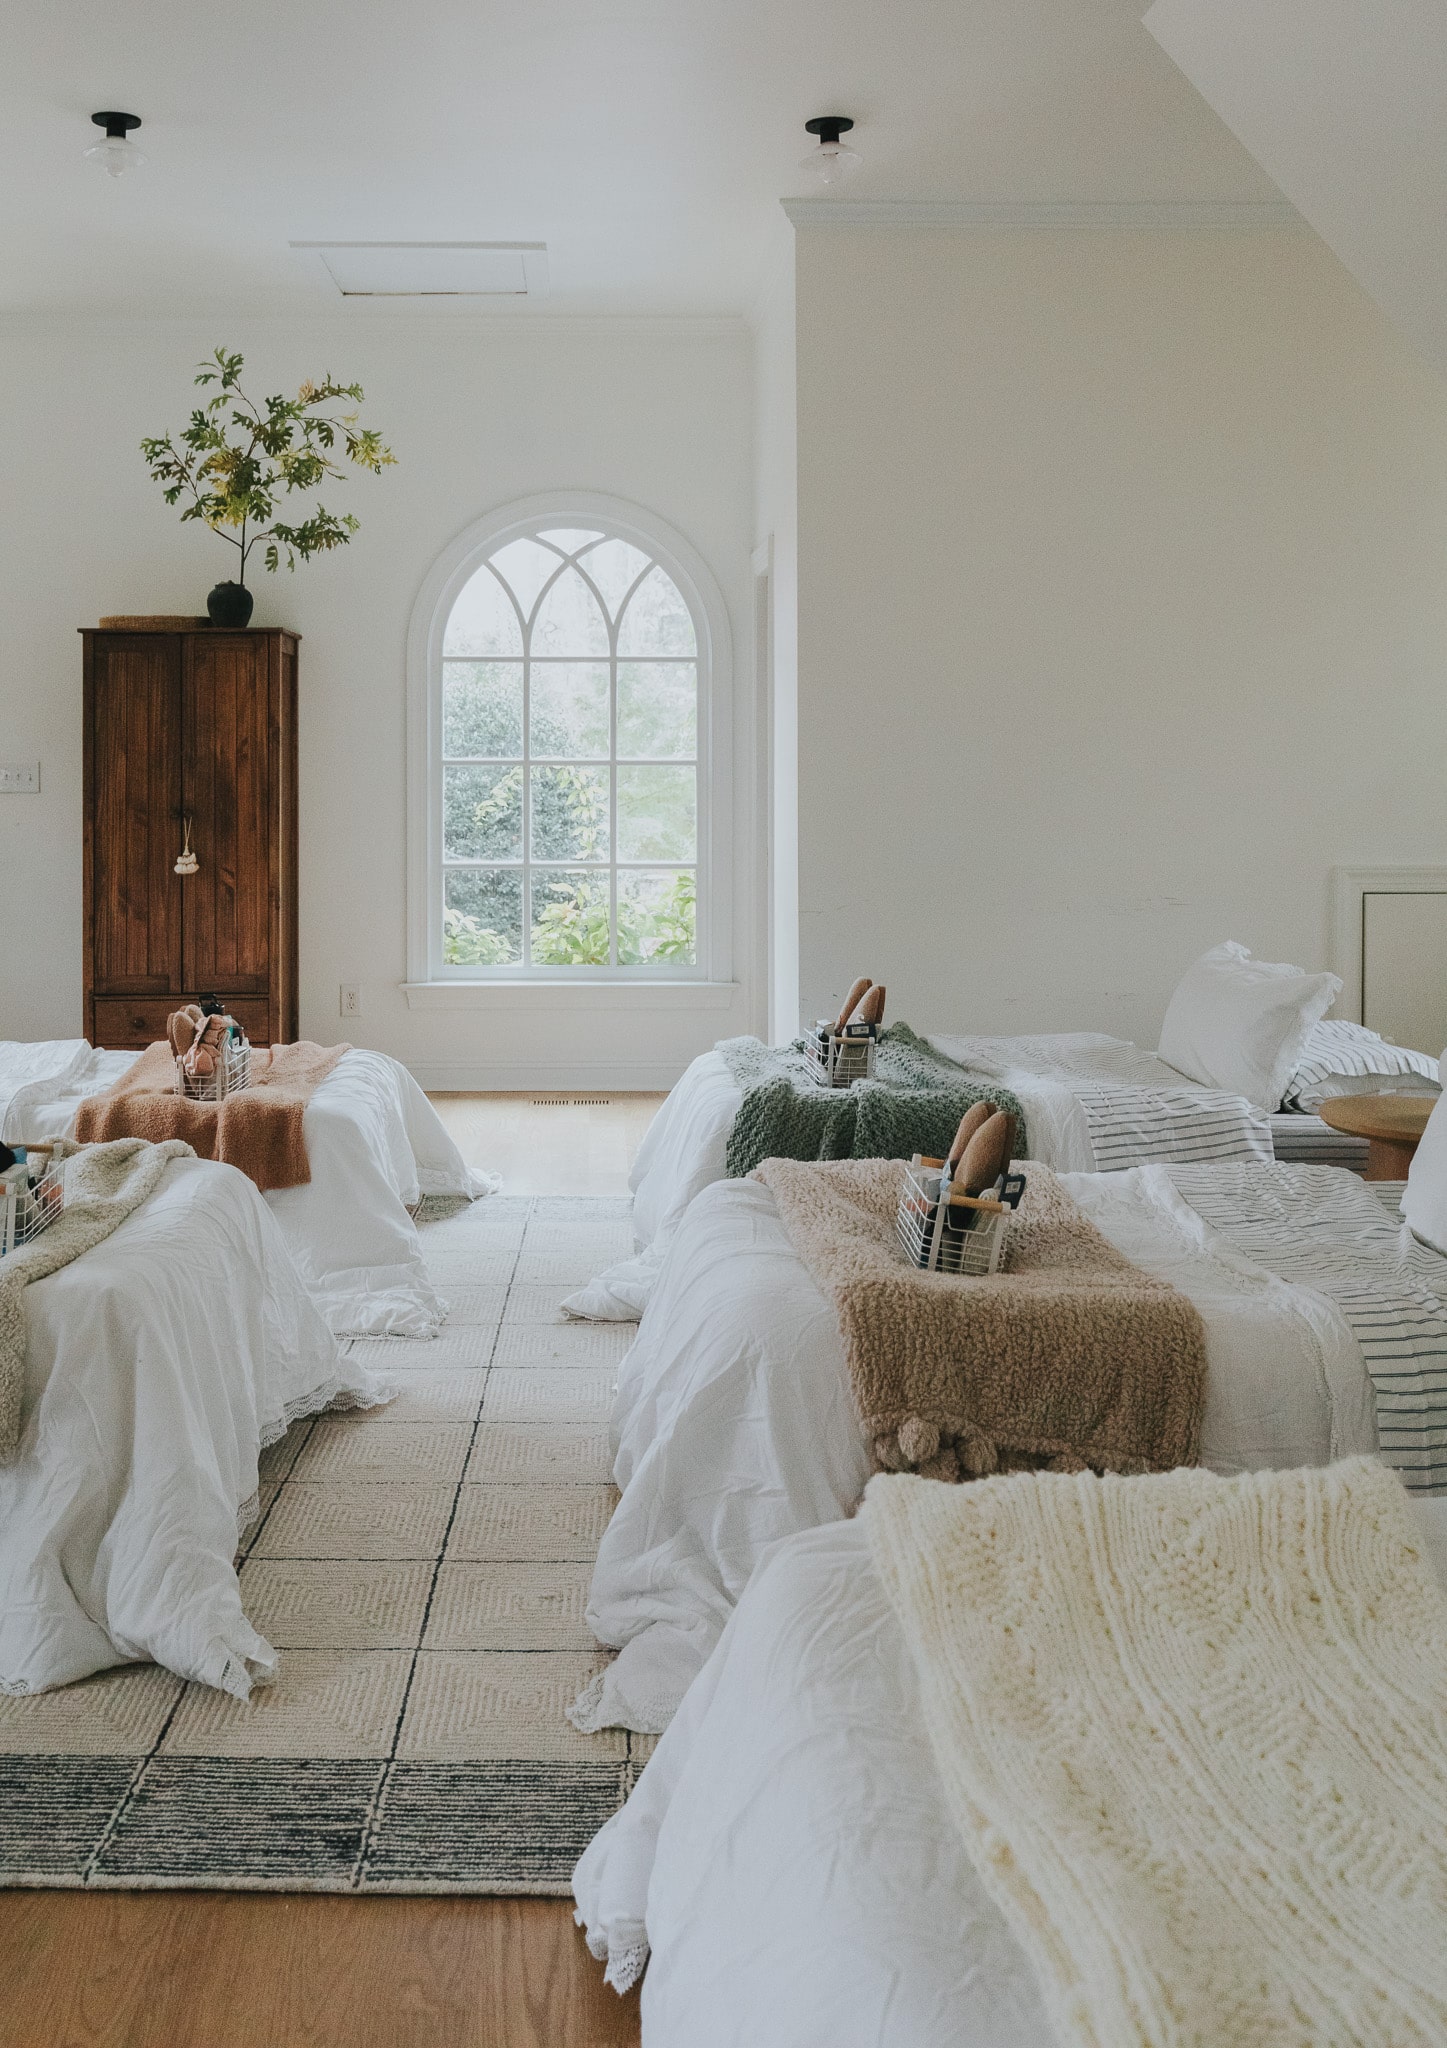 4 Tips for Making a Cozy Pop-Up Temporary Guest Room